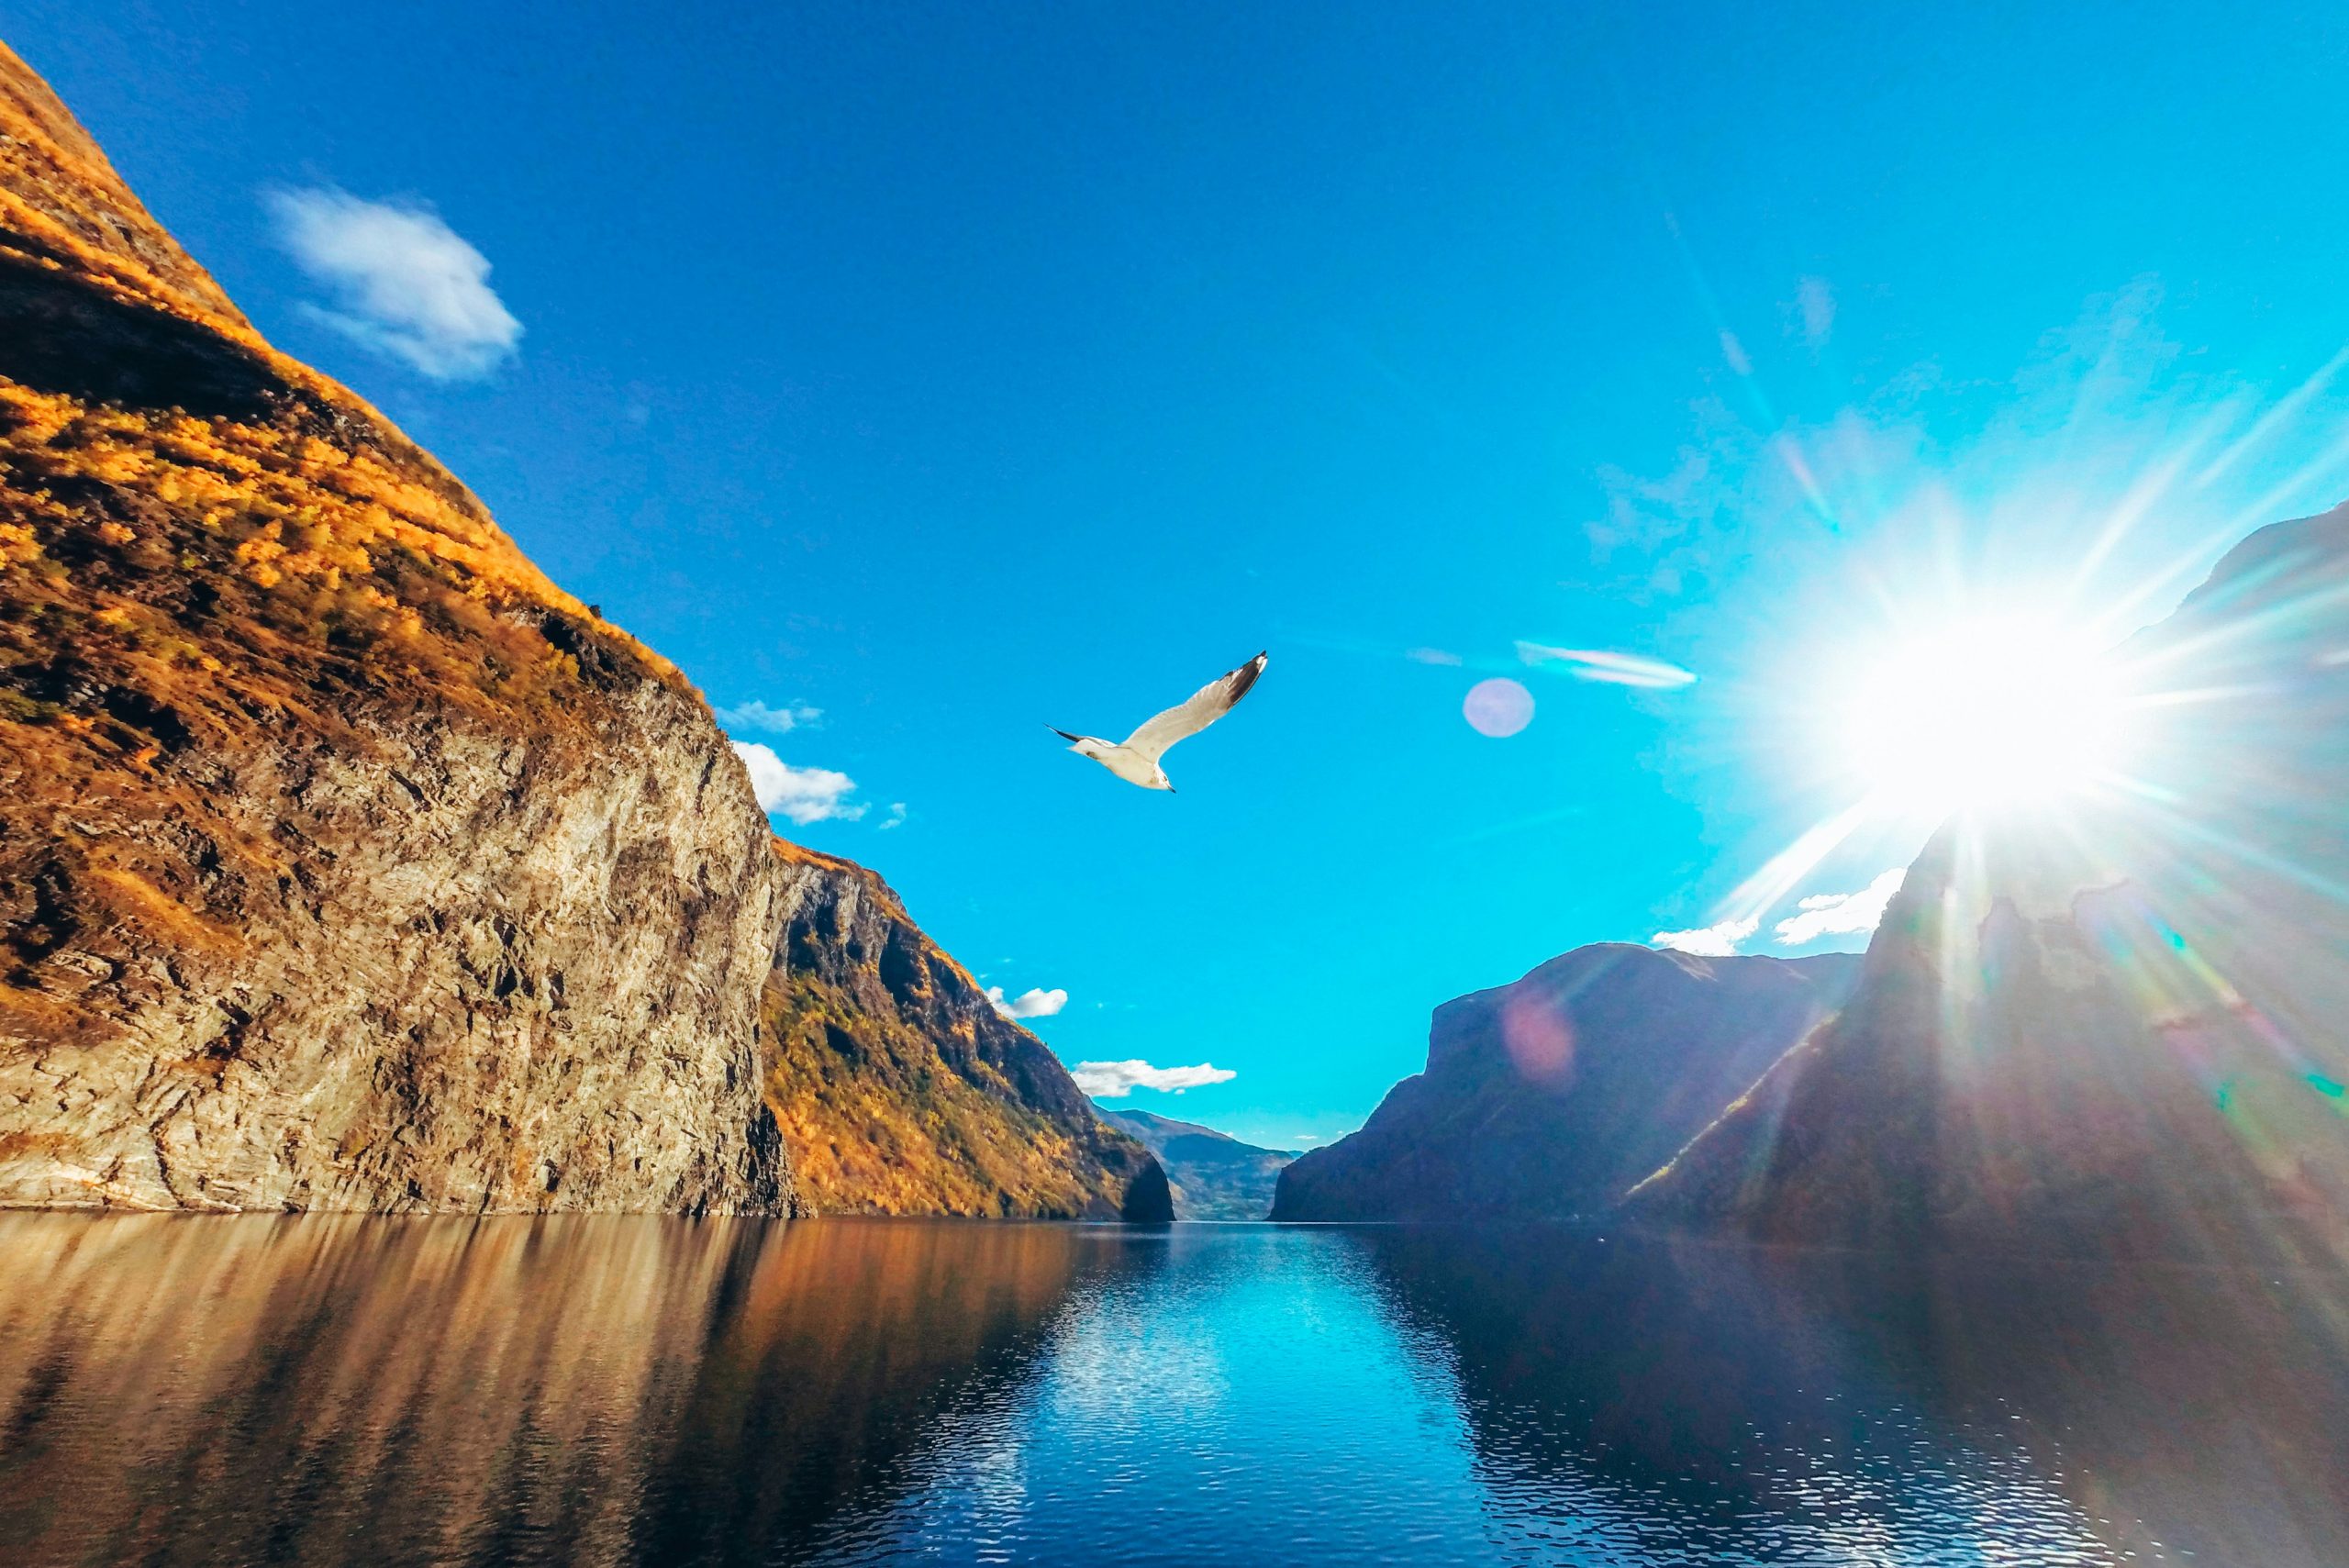 explore the breathtaking beauty of norway's fjords and experience the stunning natural landscapes of this nordic paradise.